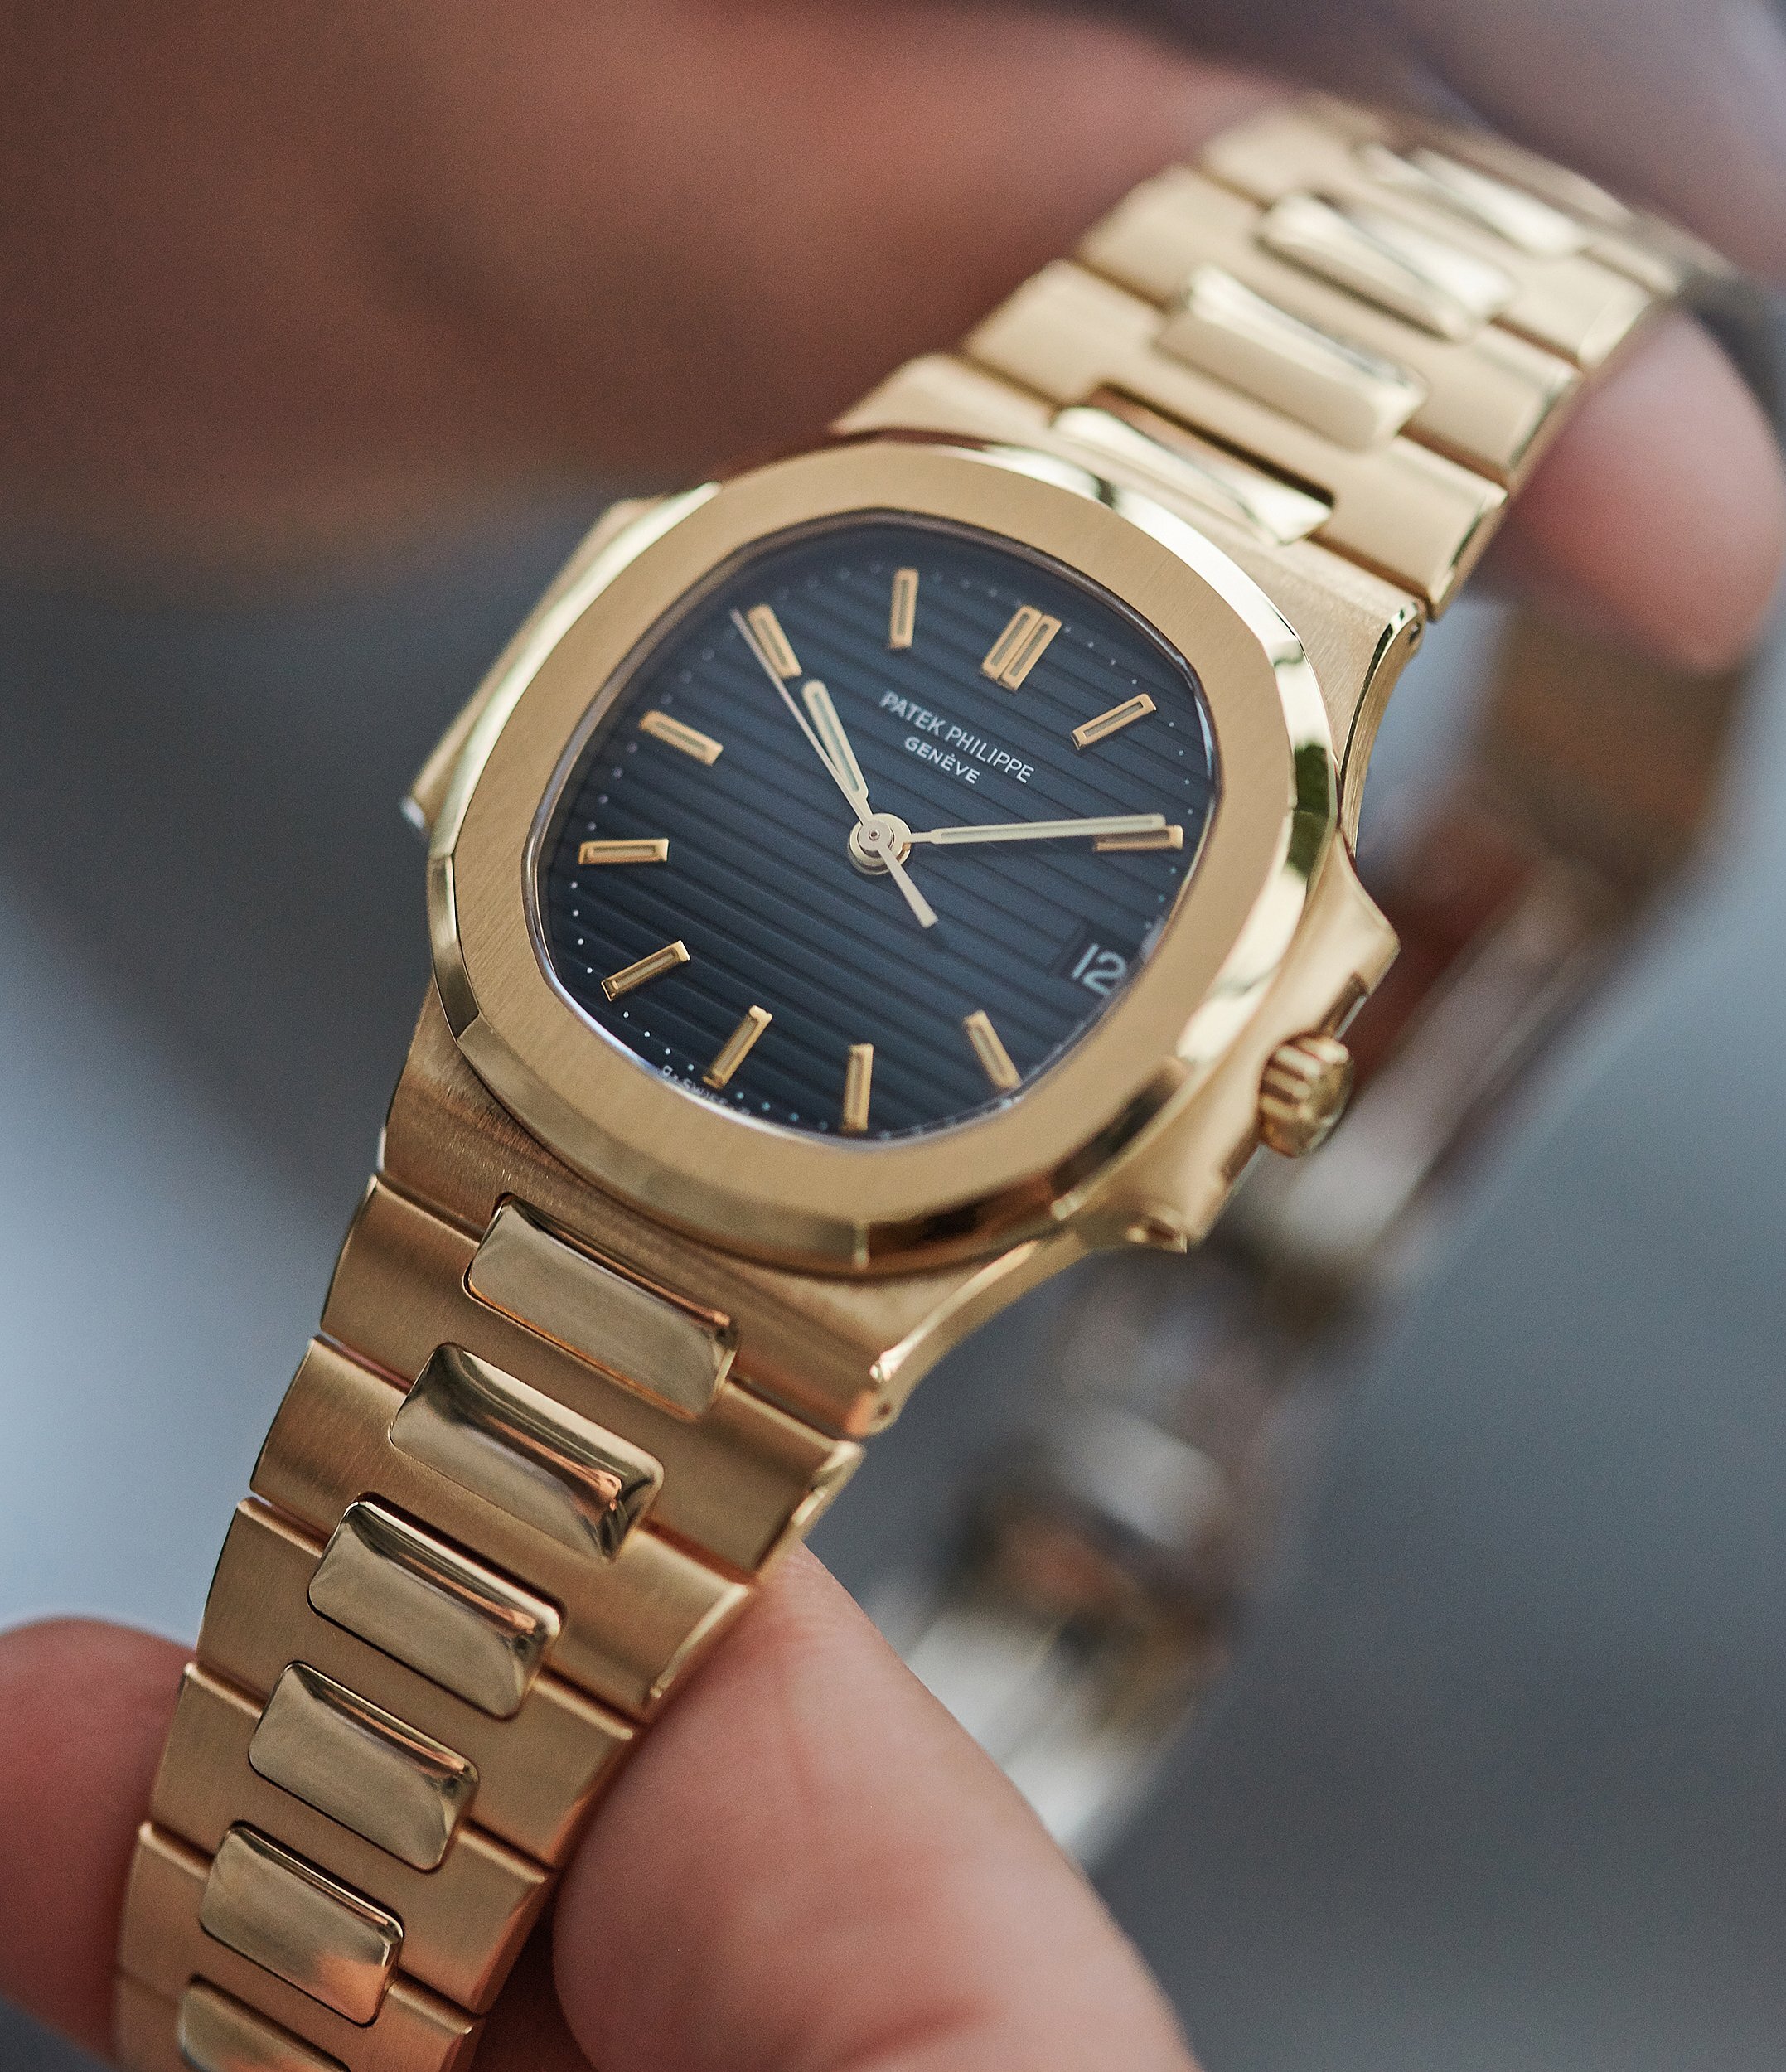 Patek_Philippe_Nautilus_3800_yellow_gold_watch_at_A_Collected_Man_London9.jpg